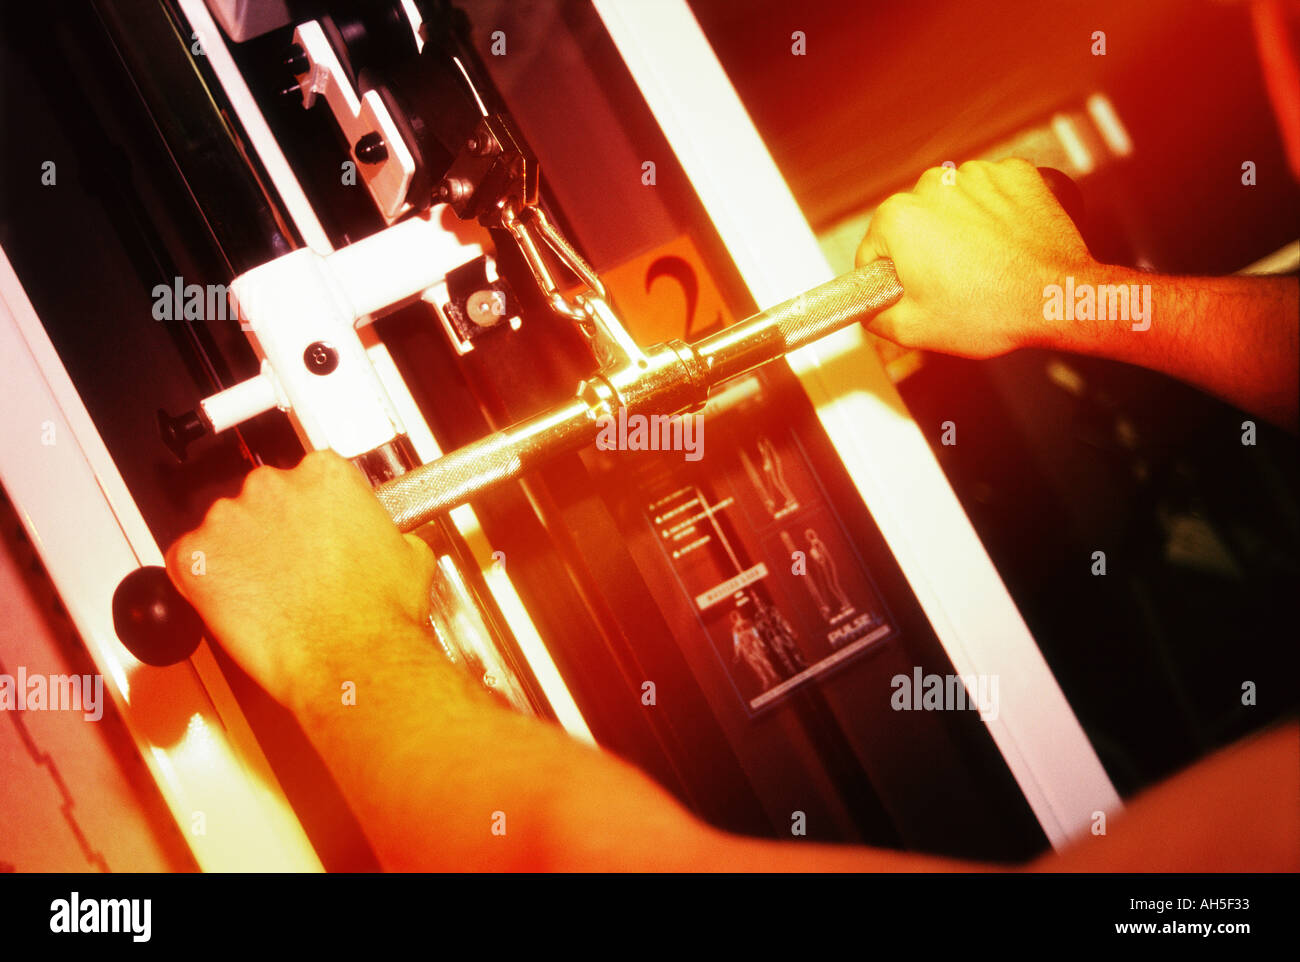 Weights machine showing arms exercising in gym warm lighting  Stock Photo